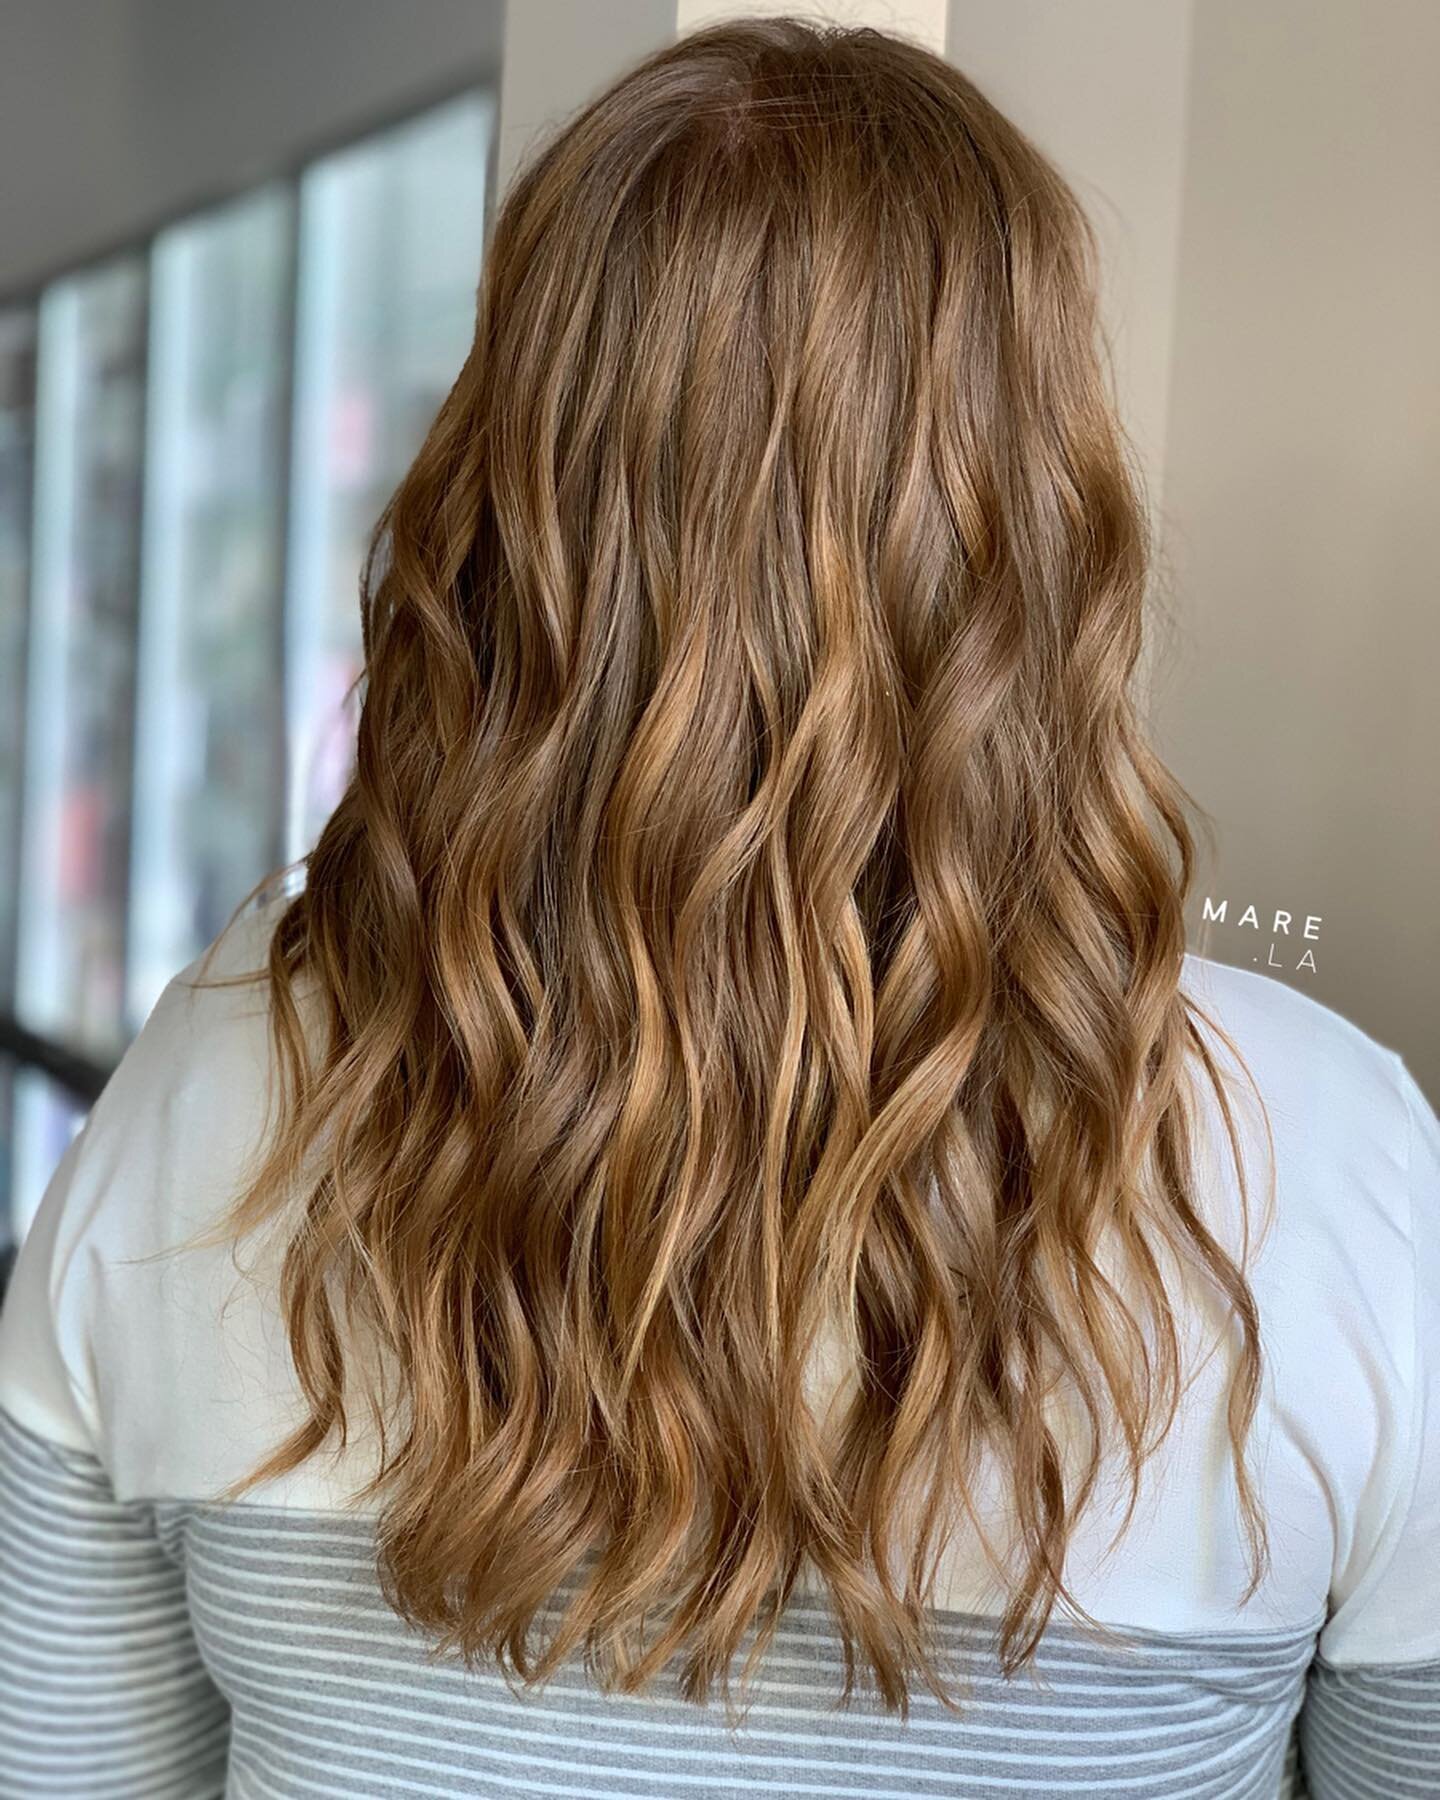 It&rsquo;s been a year since her last cut so @tflunk was dying for a fresh look! By giving her the right layers and textures , this added more dimension &amp; depth in her natural color. What a difference a haircut can do to someone&rsquo;s color. I&